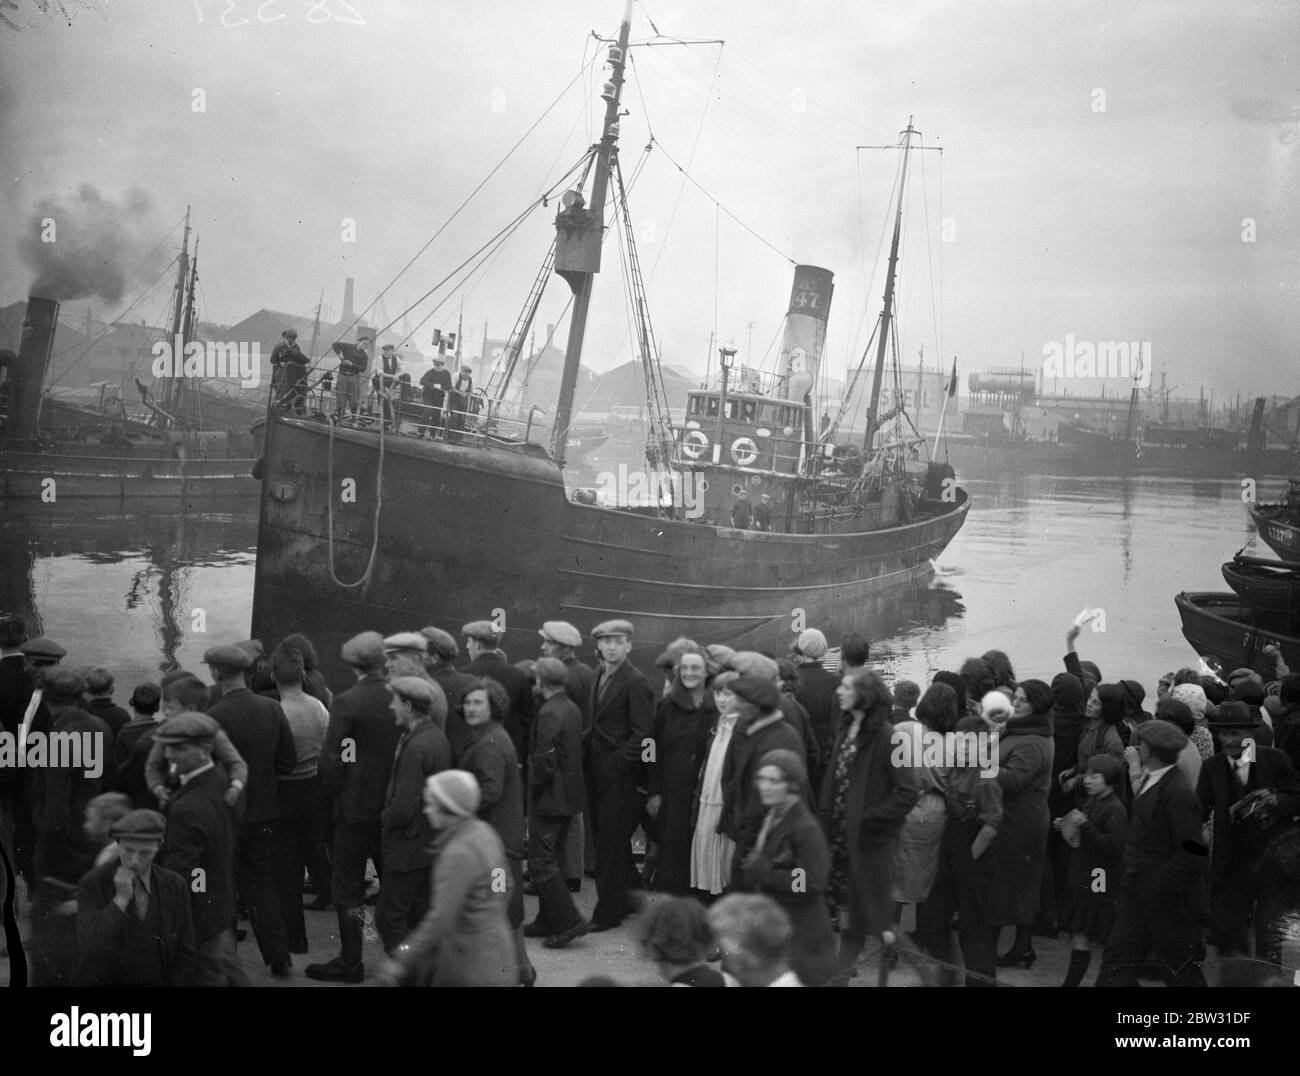 The trawler  Lord Talbot  arrives at Aberdeen . A great welcome awaited the British trawler  Lord Talbot  when she arrived at Aberdeen after rescuing the  Flying Family  , Mr and Mrs George Hutchinson , their two children , and the other four members of the crew off the coast of Greenland , after they had crashed in the plane  Flying Family  on their Atlantic flight . The crowd on the shore cheering the  Lord Talbot  as she arrived in Aberdeen . 22 September 1932 Stock Photo